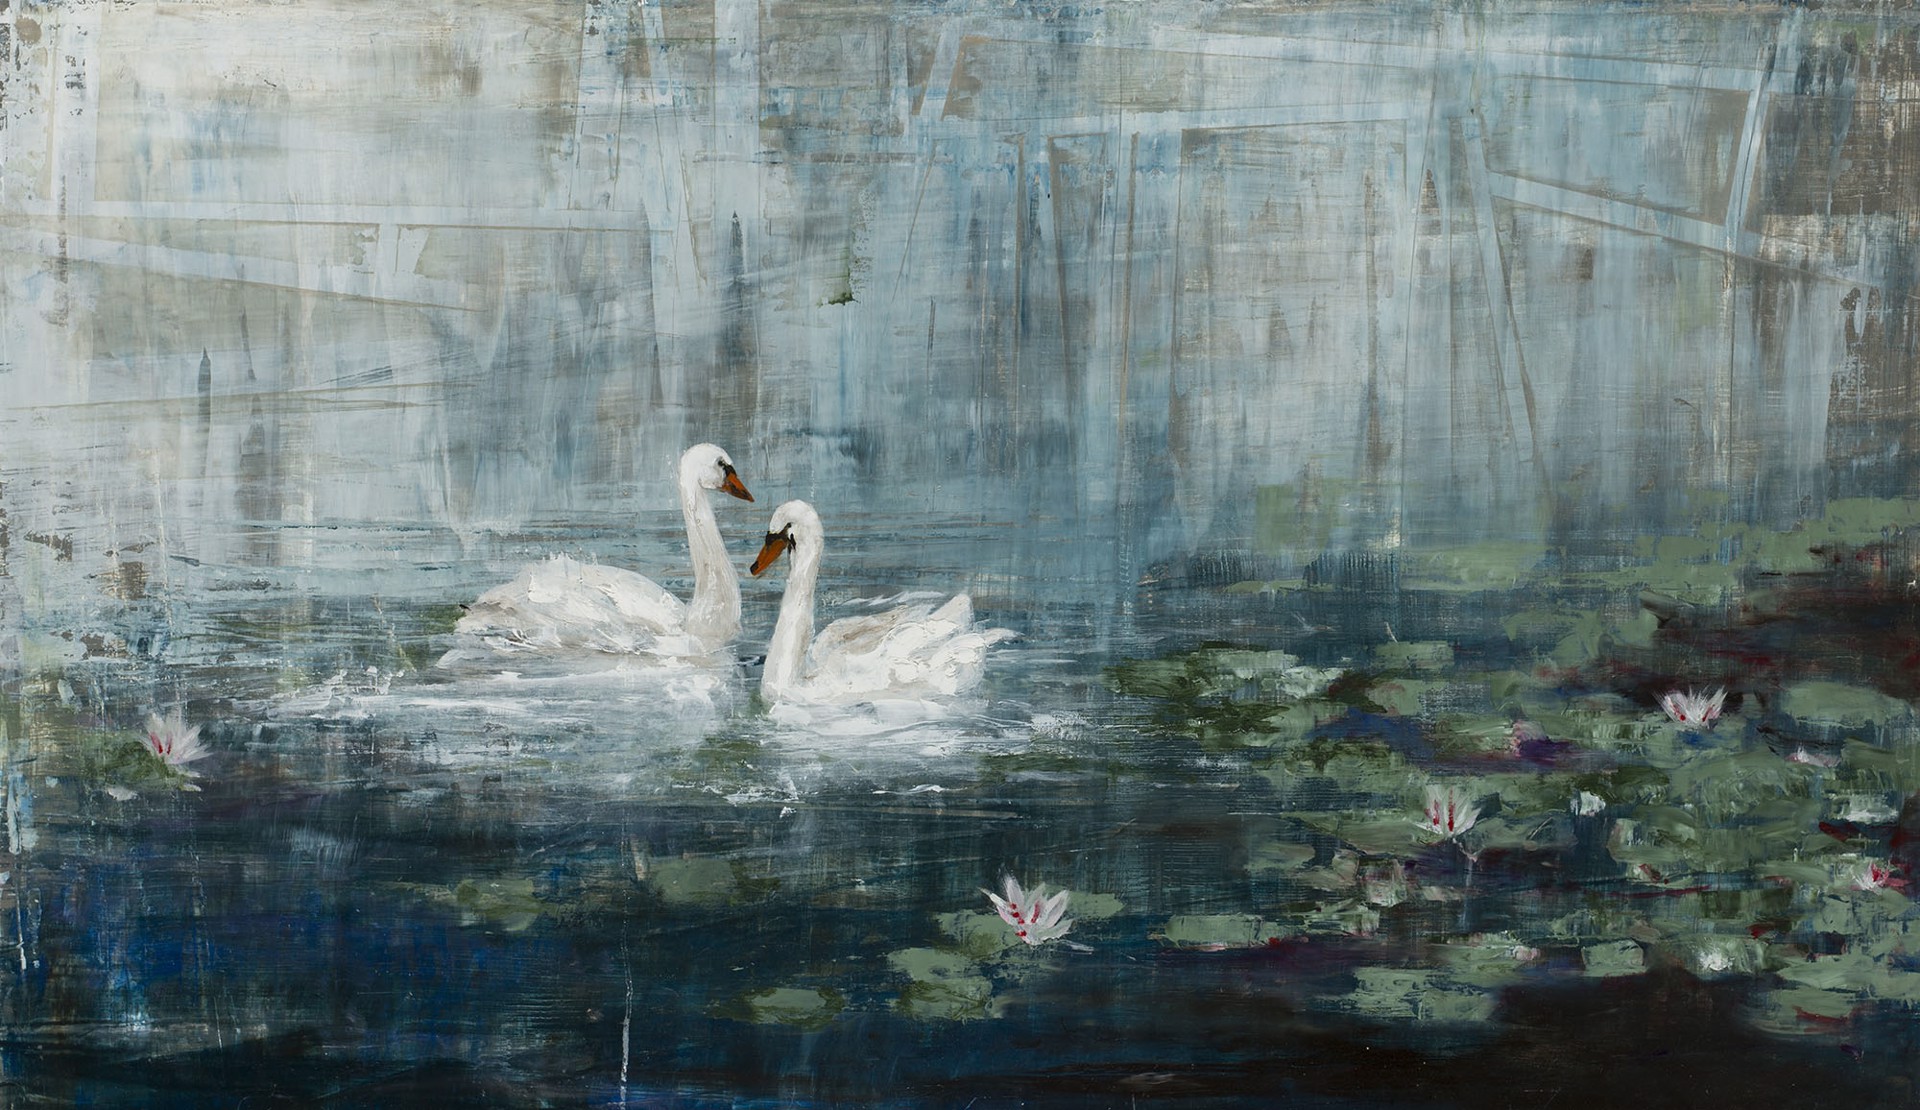 Oil Painting Of Two Swans In Lily Pads With Abstract Contemporary Background Of Blues and Whites, By Jenna Von Benedikt